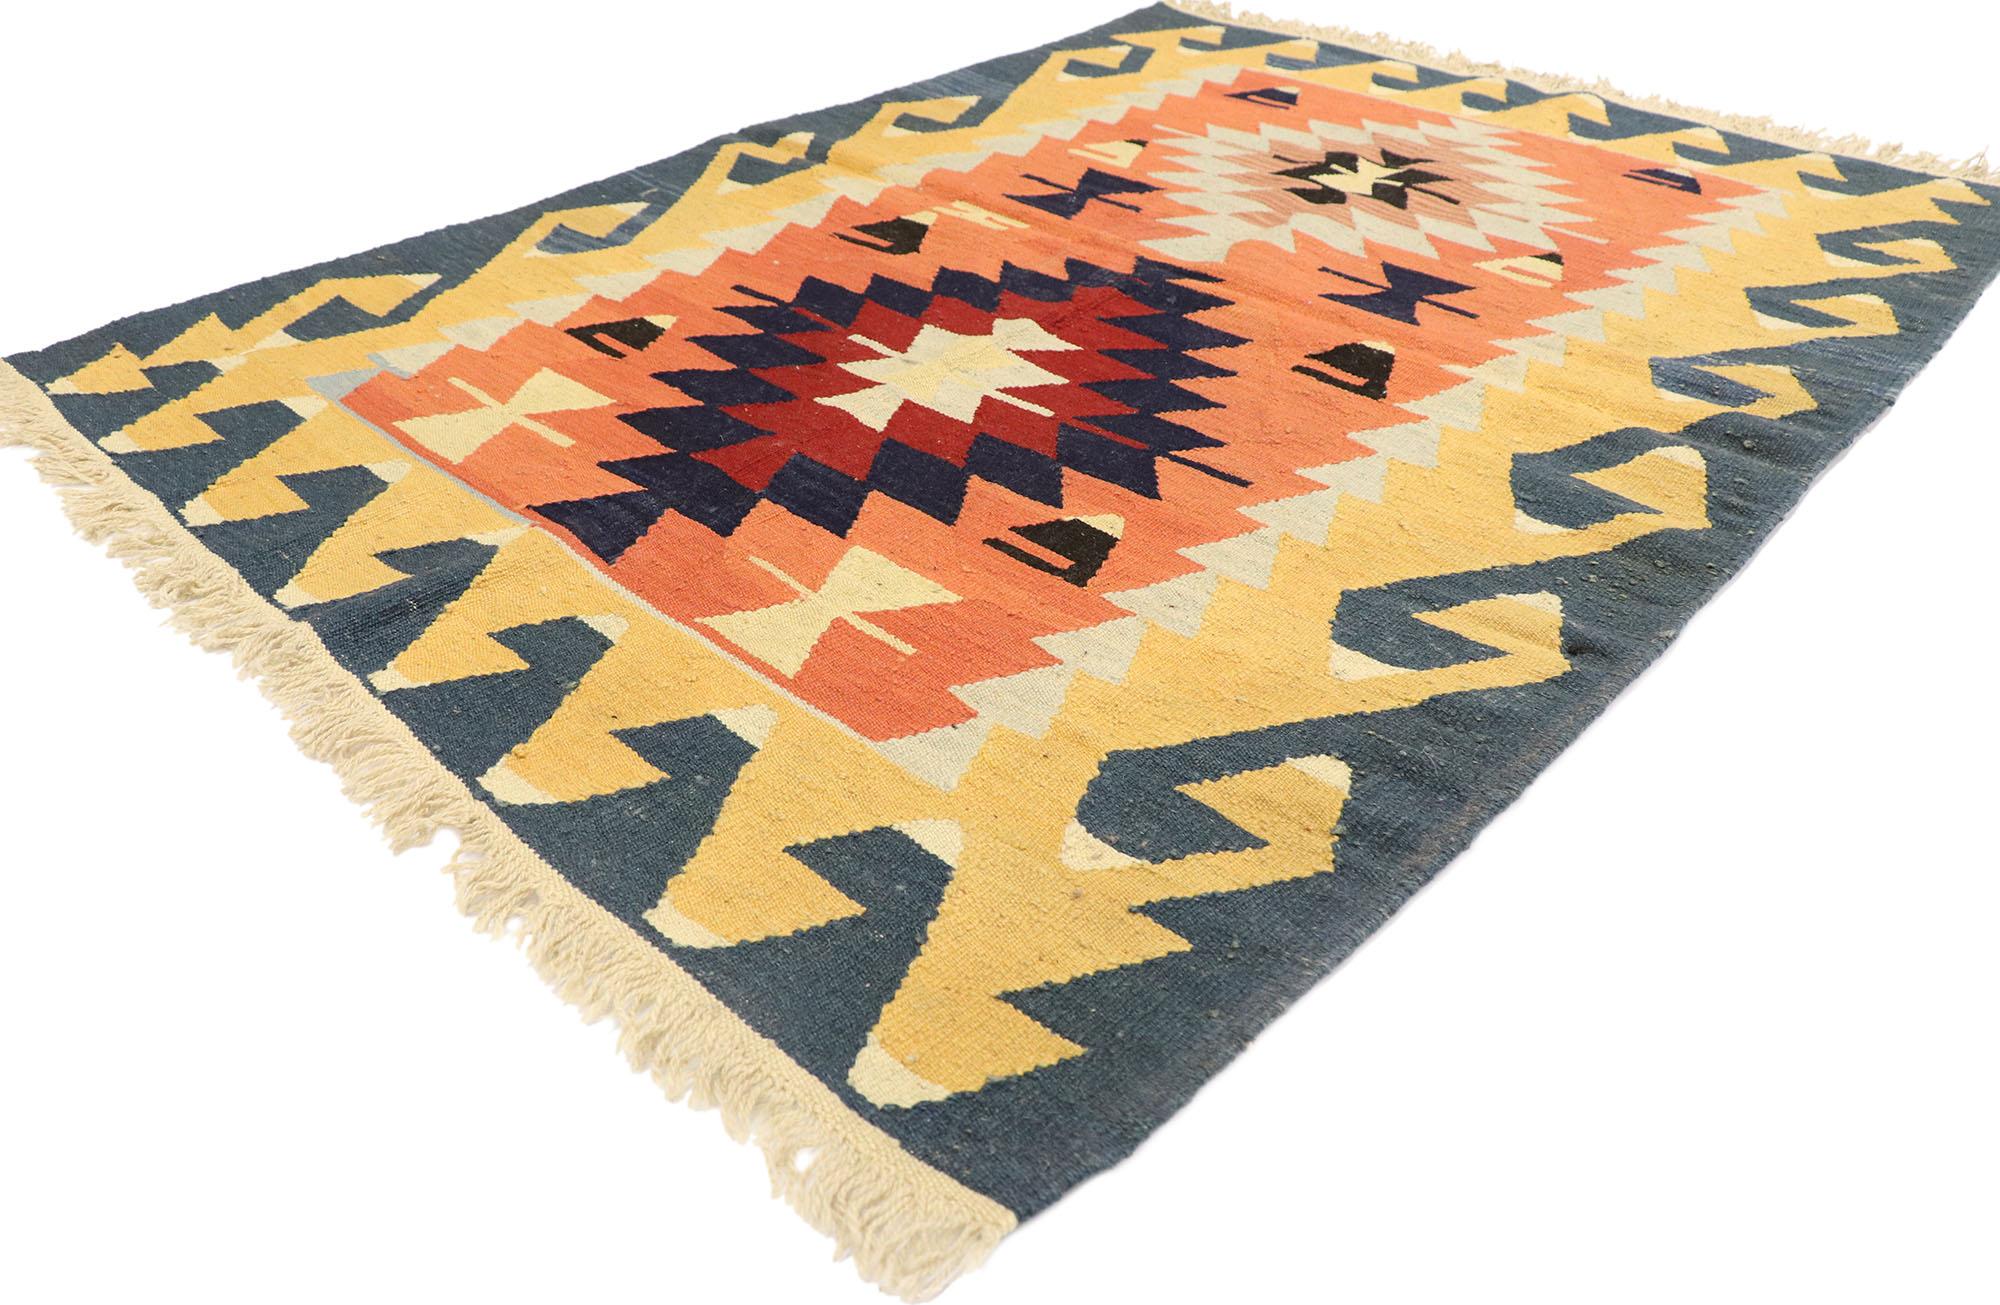 77974 Vintage Persian Shiraz Kilim rug with Tribal Style 03'10 x 05'04. Full of tiny details and a bold expressive design combined with warm colors and tribal style, this hand-woven wool vintage Persian Shiraz kilim rug is a captivating vision of